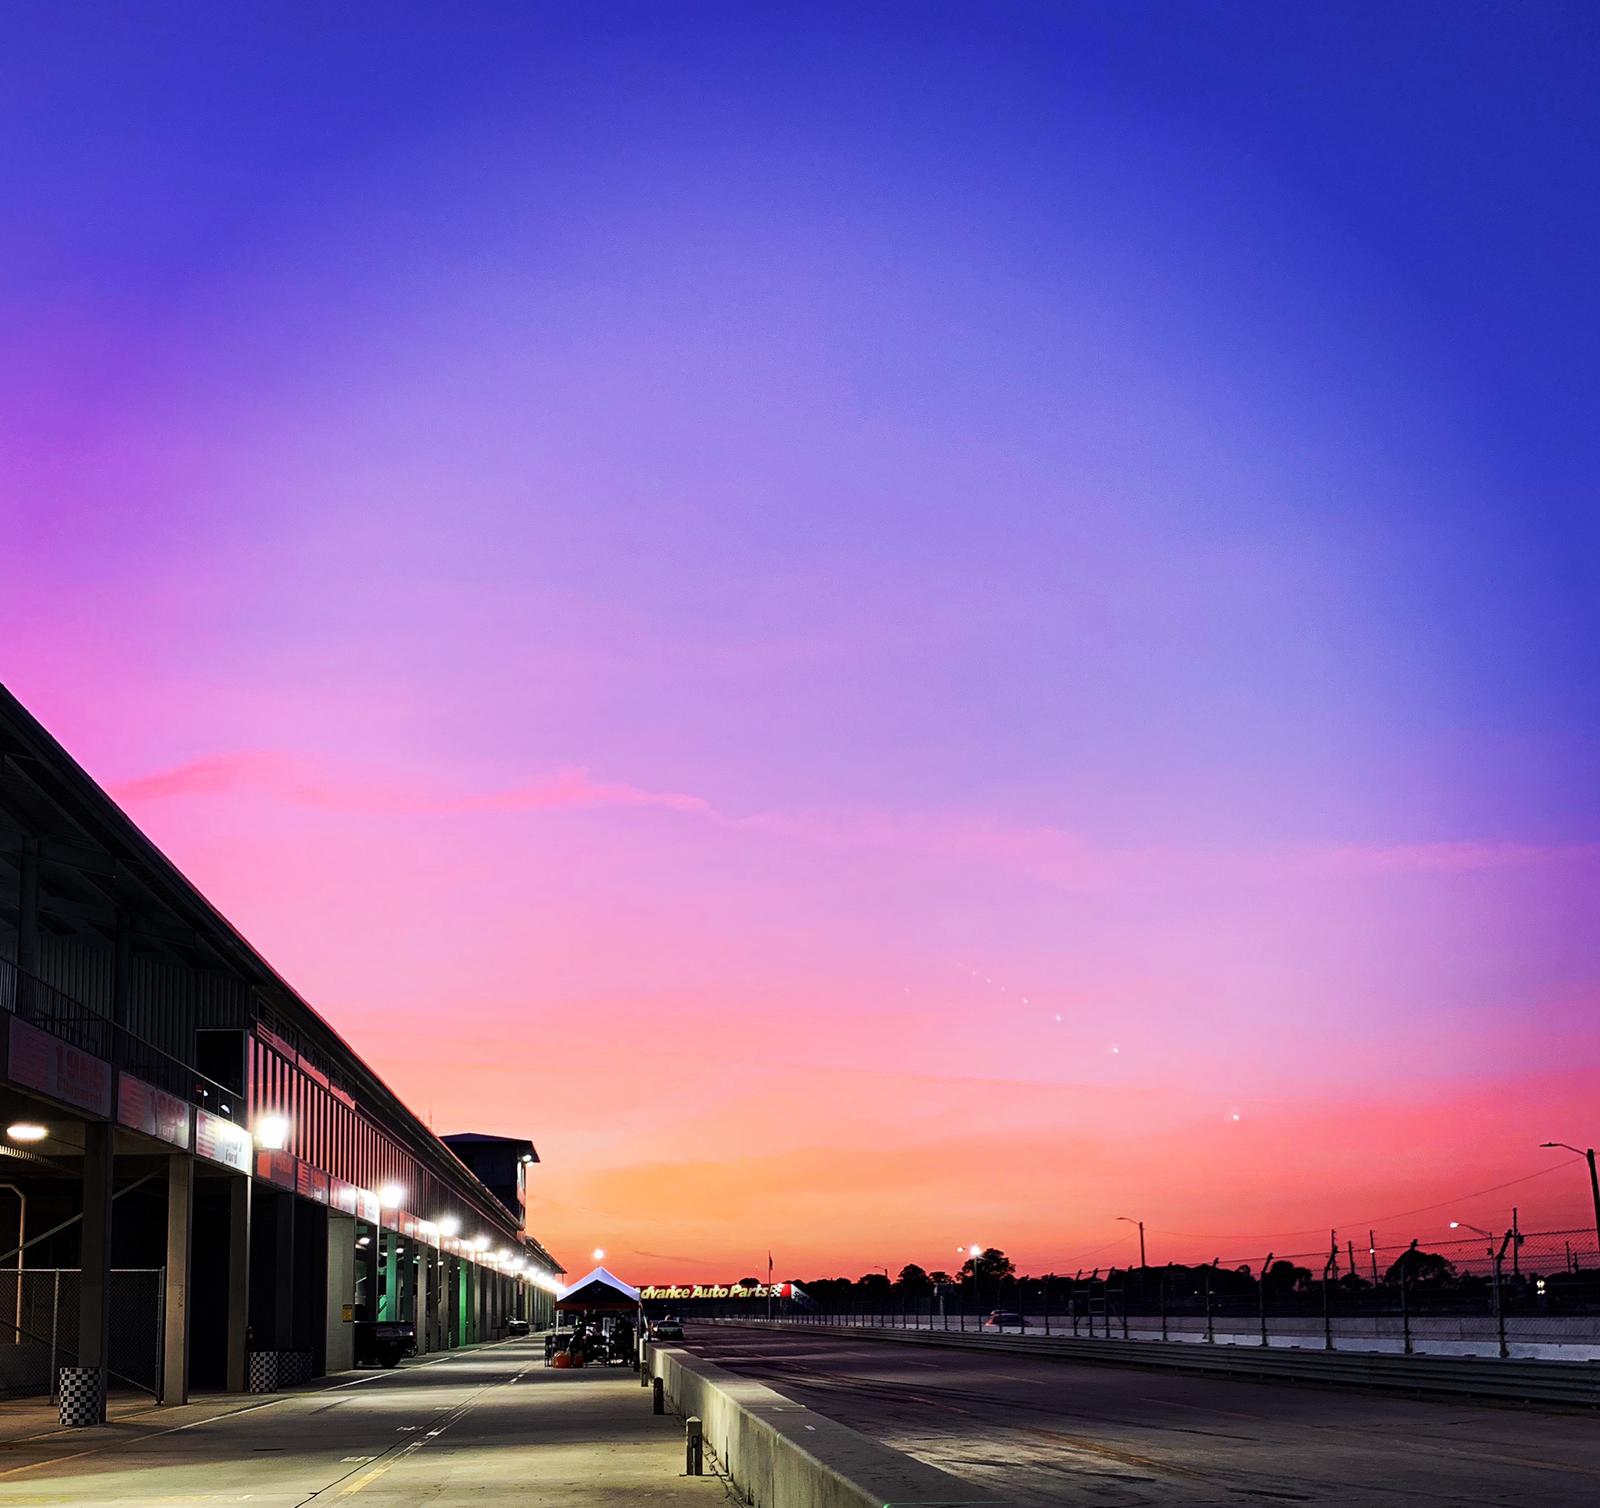 The sunsets at Sebring are amazing, and it's even more special racing into one at Turn17/“Sunset Bend.”